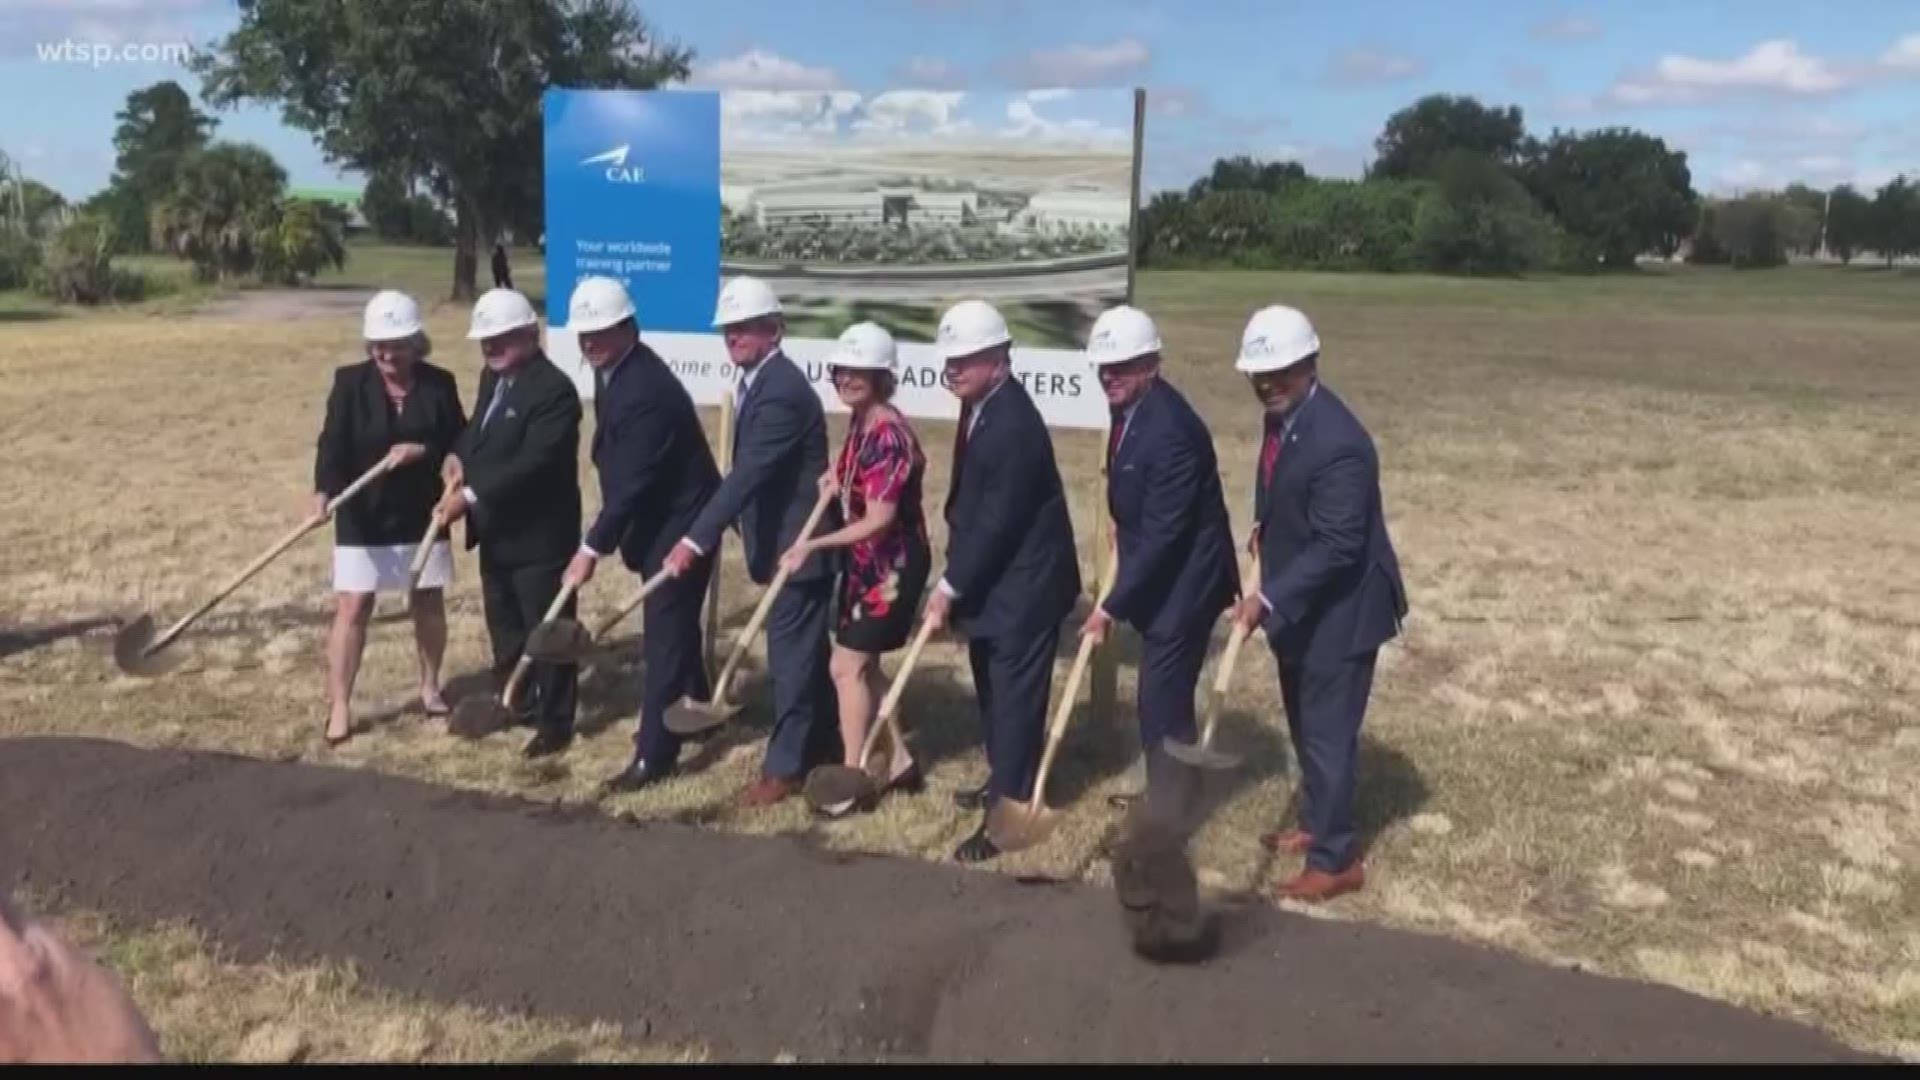 The new facility is expected to bring an additional 100 jobs and open in 2022. https://bit.ly/2pEeiNc